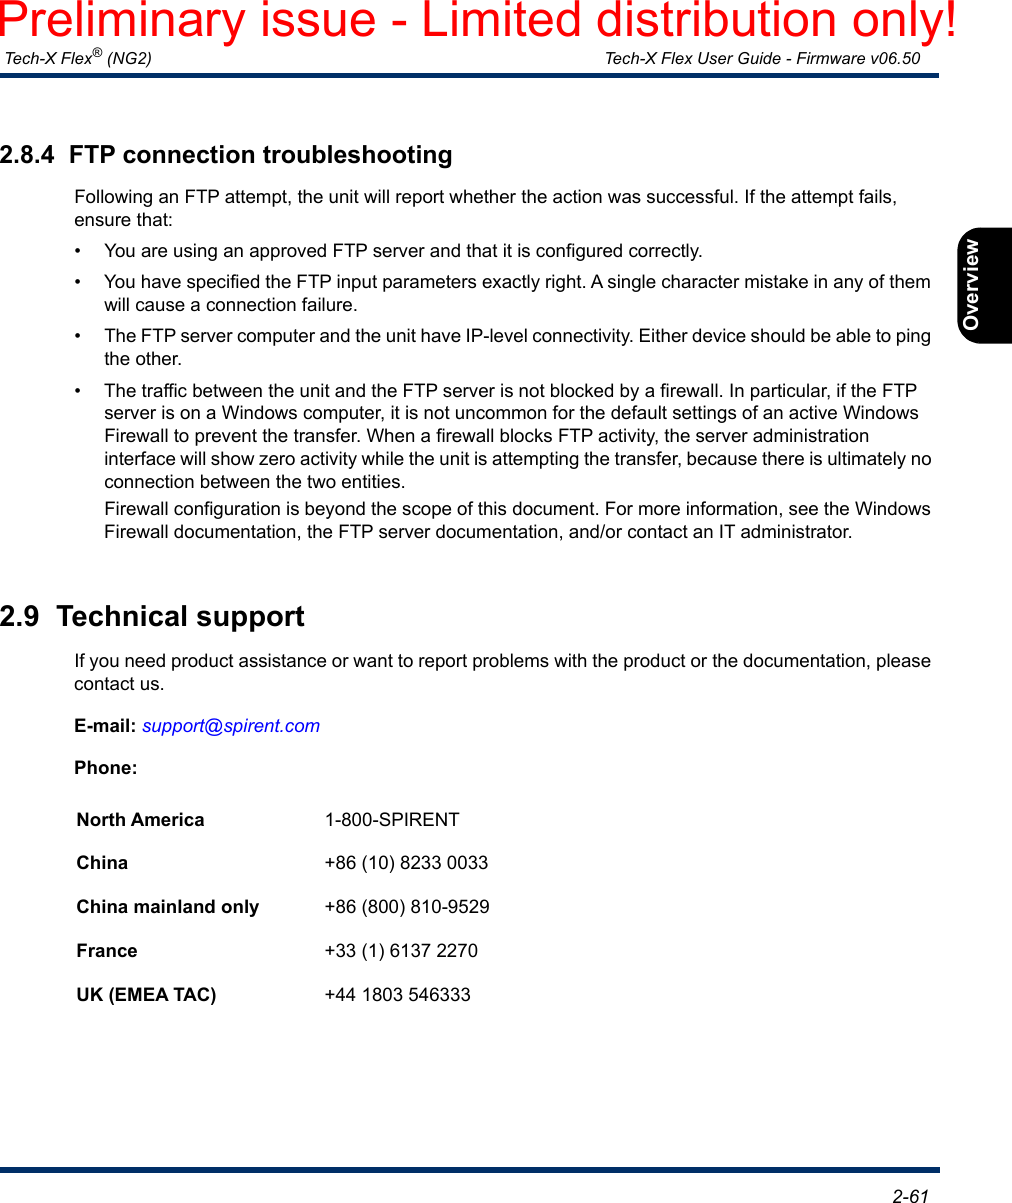  Tech-X Flex® (NG2) Tech-X Flex User Guide - Firmware v06.50   2-61IntroOverviewWi-FiEthernetSystemIP/VideoMoCARFSpecs2.8.4  FTP connection troubleshootingFollowing an FTP attempt, the unit will report whether the action was successful. If the attempt fails, ensure that:• You are using an approved FTP server and that it is configured correctly.• You have specified the FTP input parameters exactly right. A single character mistake in any of them will cause a connection failure.• The FTP server computer and the unit have IP-level connectivity. Either device should be able to ping the other.• The traffic between the unit and the FTP server is not blocked by a firewall. In particular, if the FTP server is on a Windows computer, it is not uncommon for the default settings of an active Windows Firewall to prevent the transfer. When a firewall blocks FTP activity, the server administration interface will show zero activity while the unit is attempting the transfer, because there is ultimately no connection between the two entities.Firewall configuration is beyond the scope of this document. For more information, see the Windows Firewall documentation, the FTP server documentation, and/or contact an IT administrator.2.9  Technical supportIf you need product assistance or want to report problems with the product or the documentation, please contact us.E-mail: support@spirent.comPhone:North America 1-800-SPIRENTChina +86 (10) 8233 0033China mainland only +86 (800) 810-9529France +33 (1) 6137 2270UK (EMEA TAC) +44 1803 546333Preliminary issue - Limited distribution only!